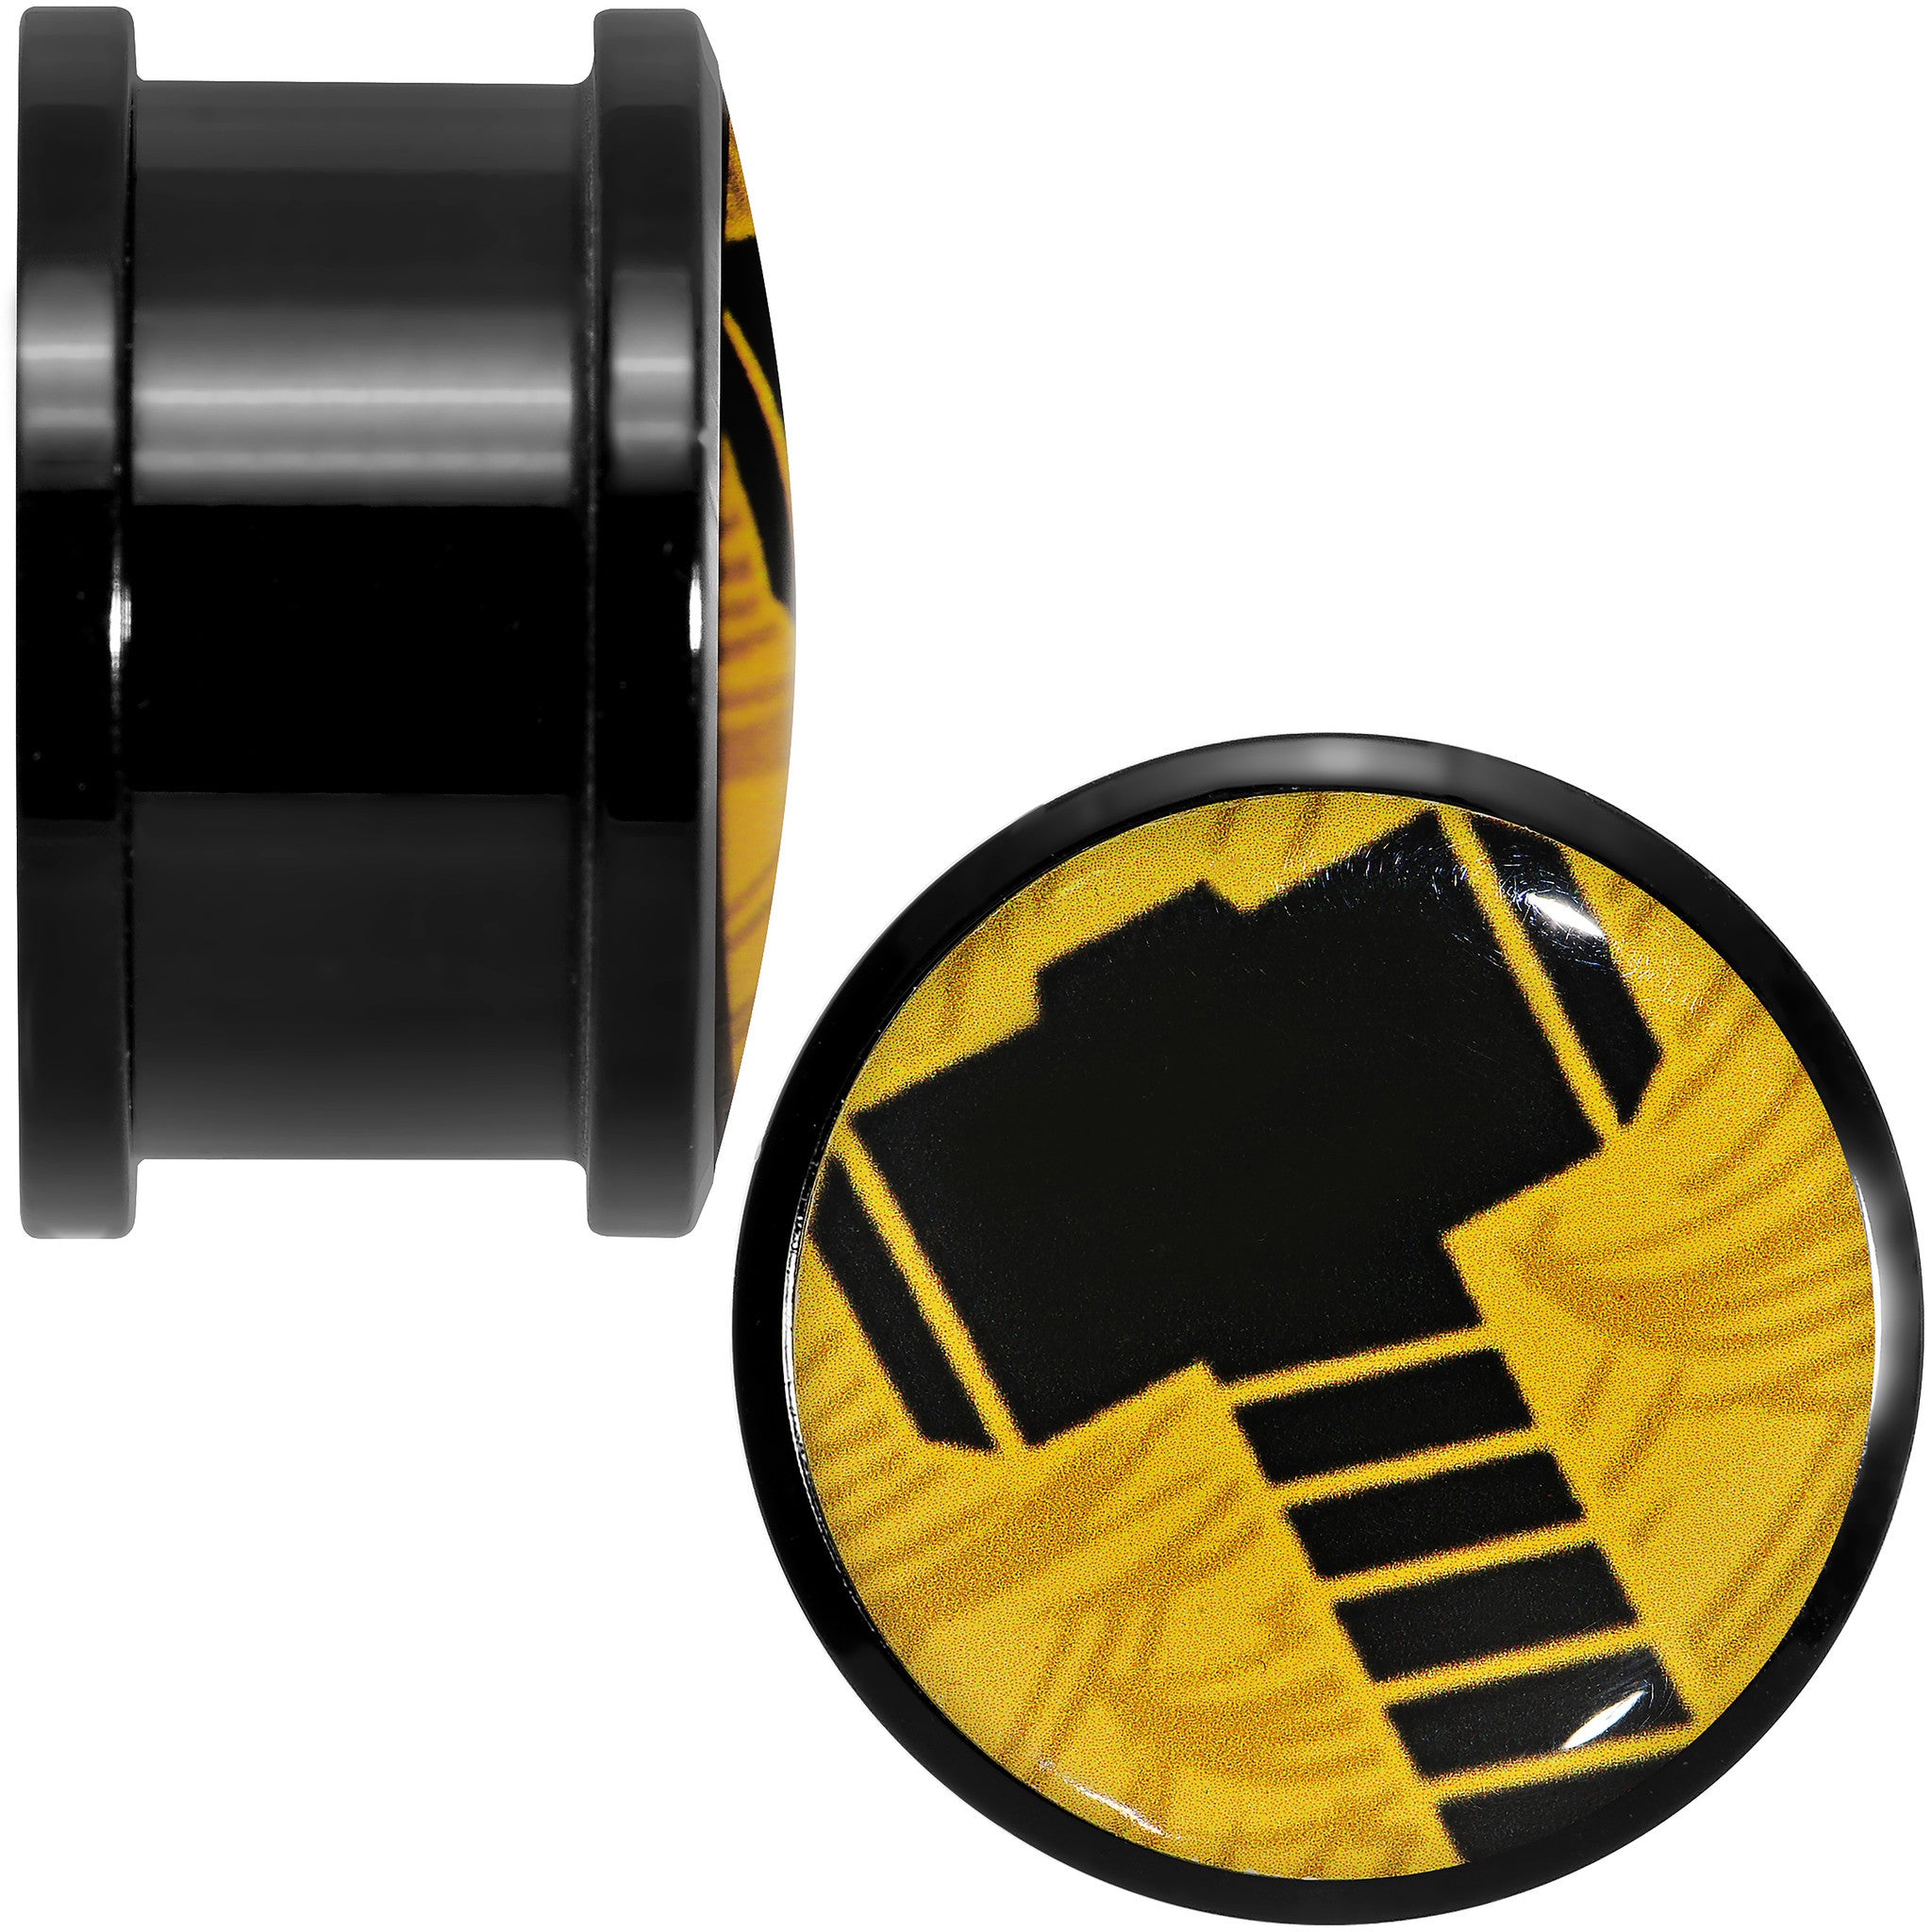 3/4 Licensed Hammer of Thor Acrylic Screw Fit Plugs Set